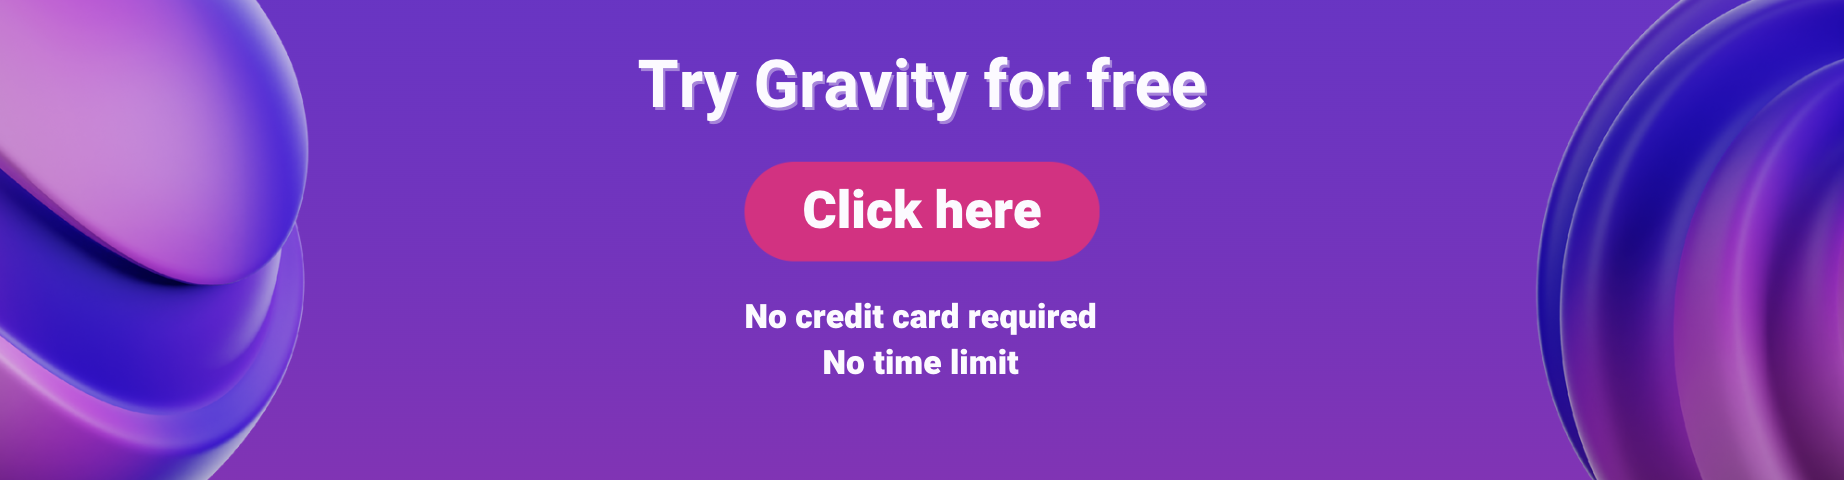 Try Gravity for free